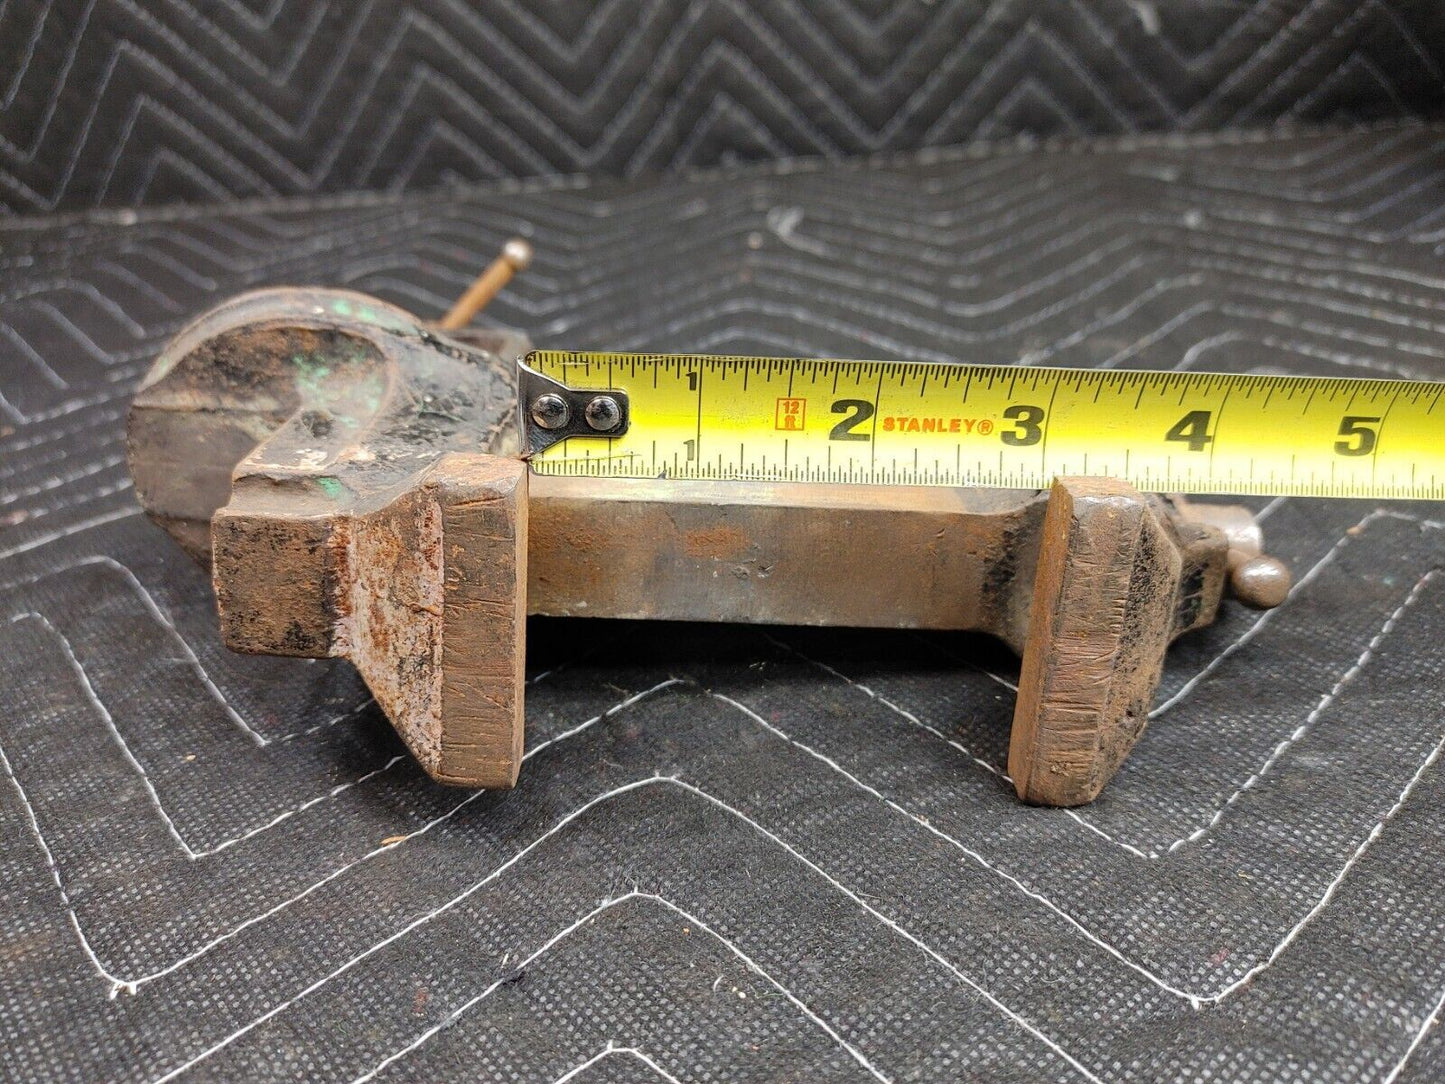 Vintage Antique Small 3" Vise Machinist Anvil Gunsmith Jeweler Clamp Bench